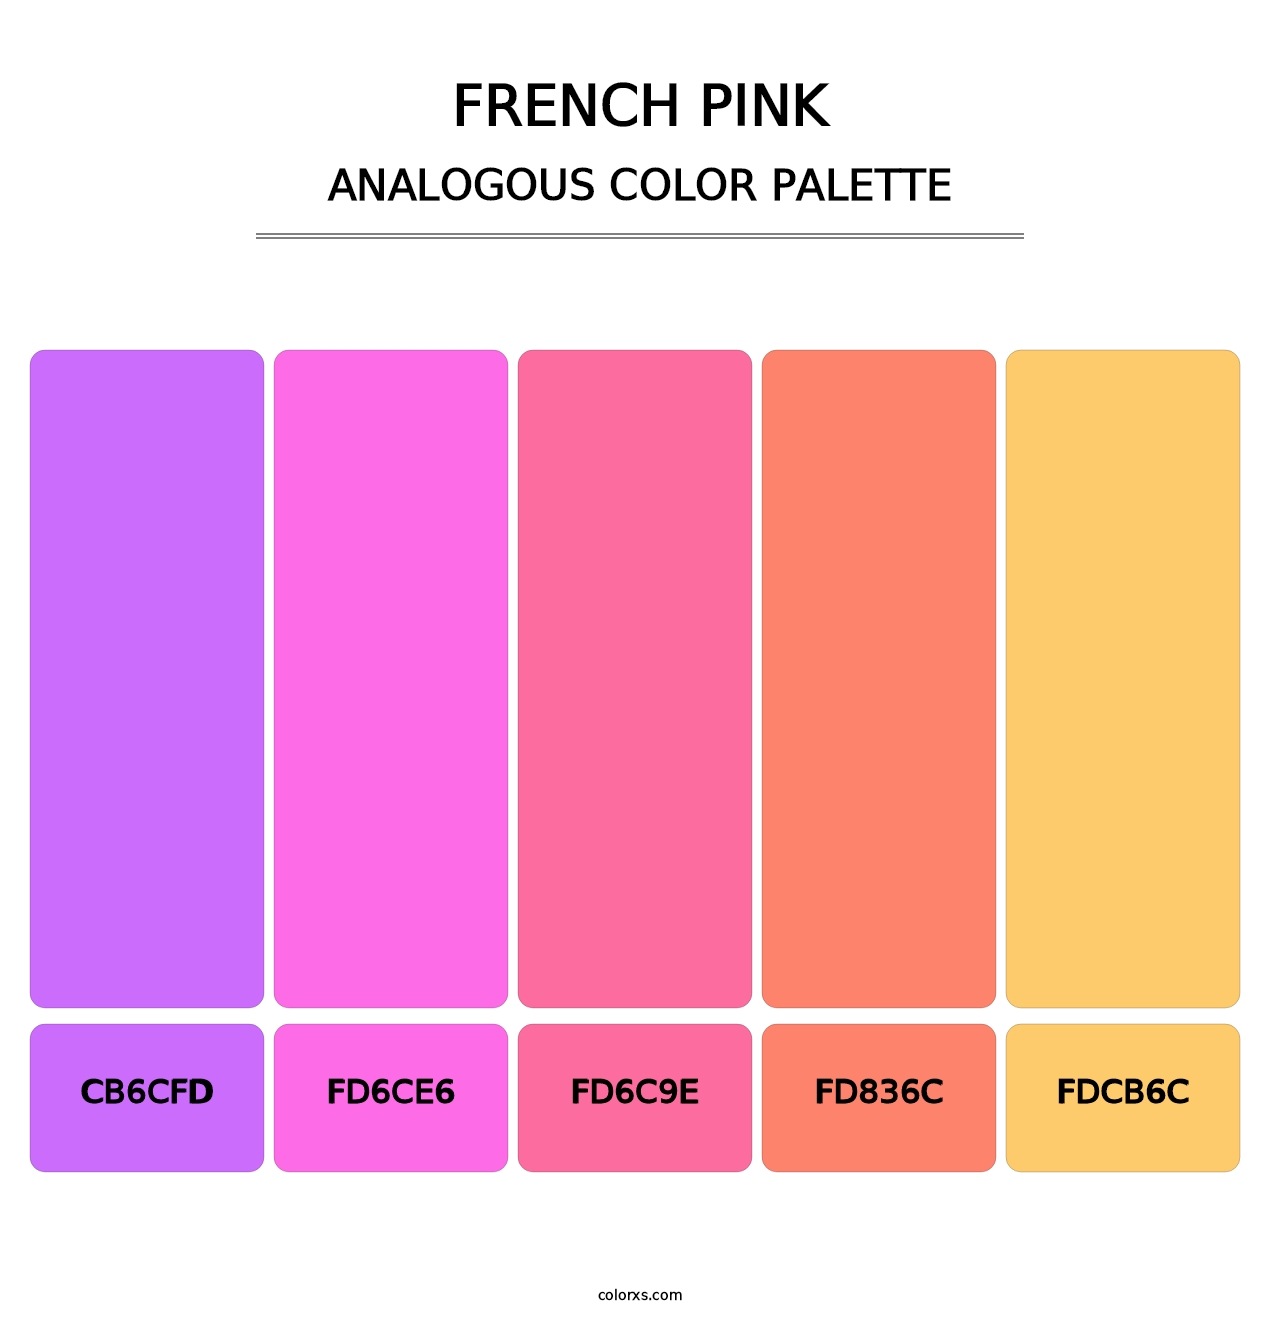 French Pink - Analogous Color Palette